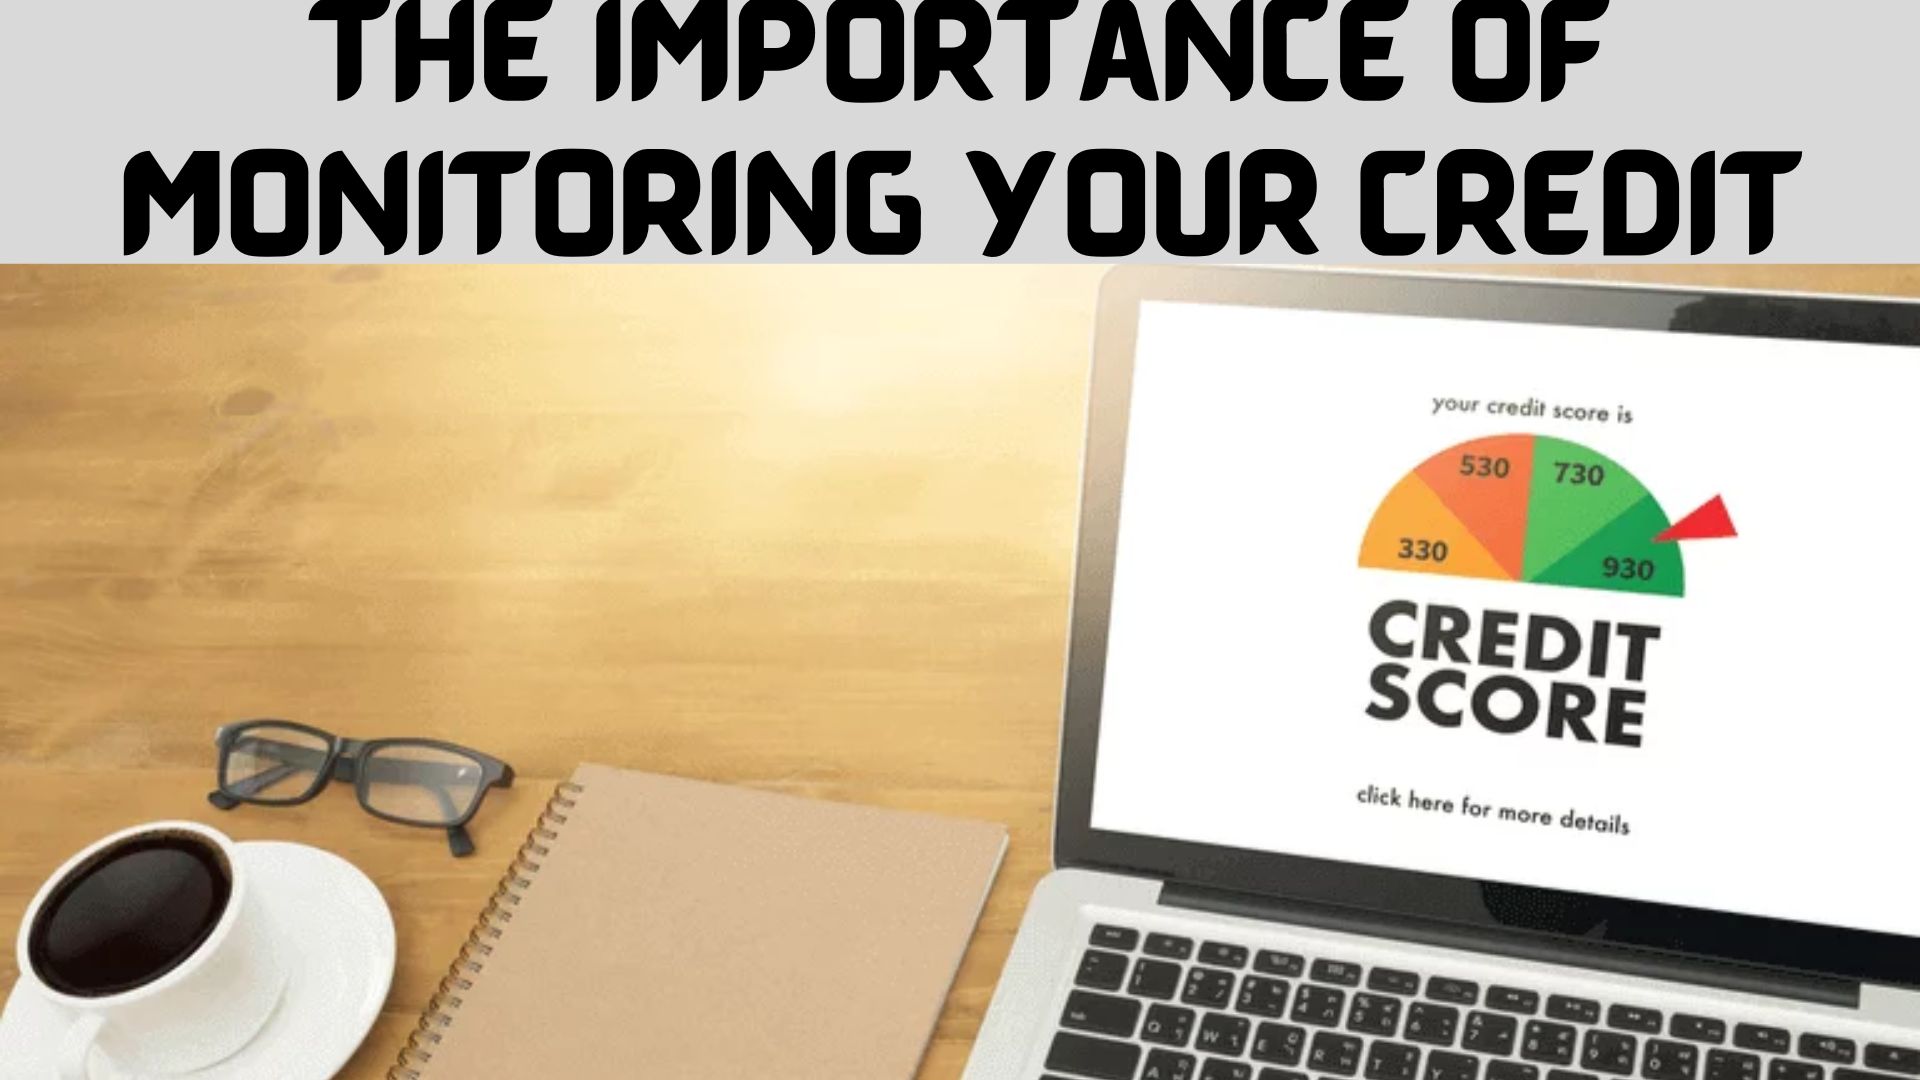 The Importance of Monitoring Your Credit